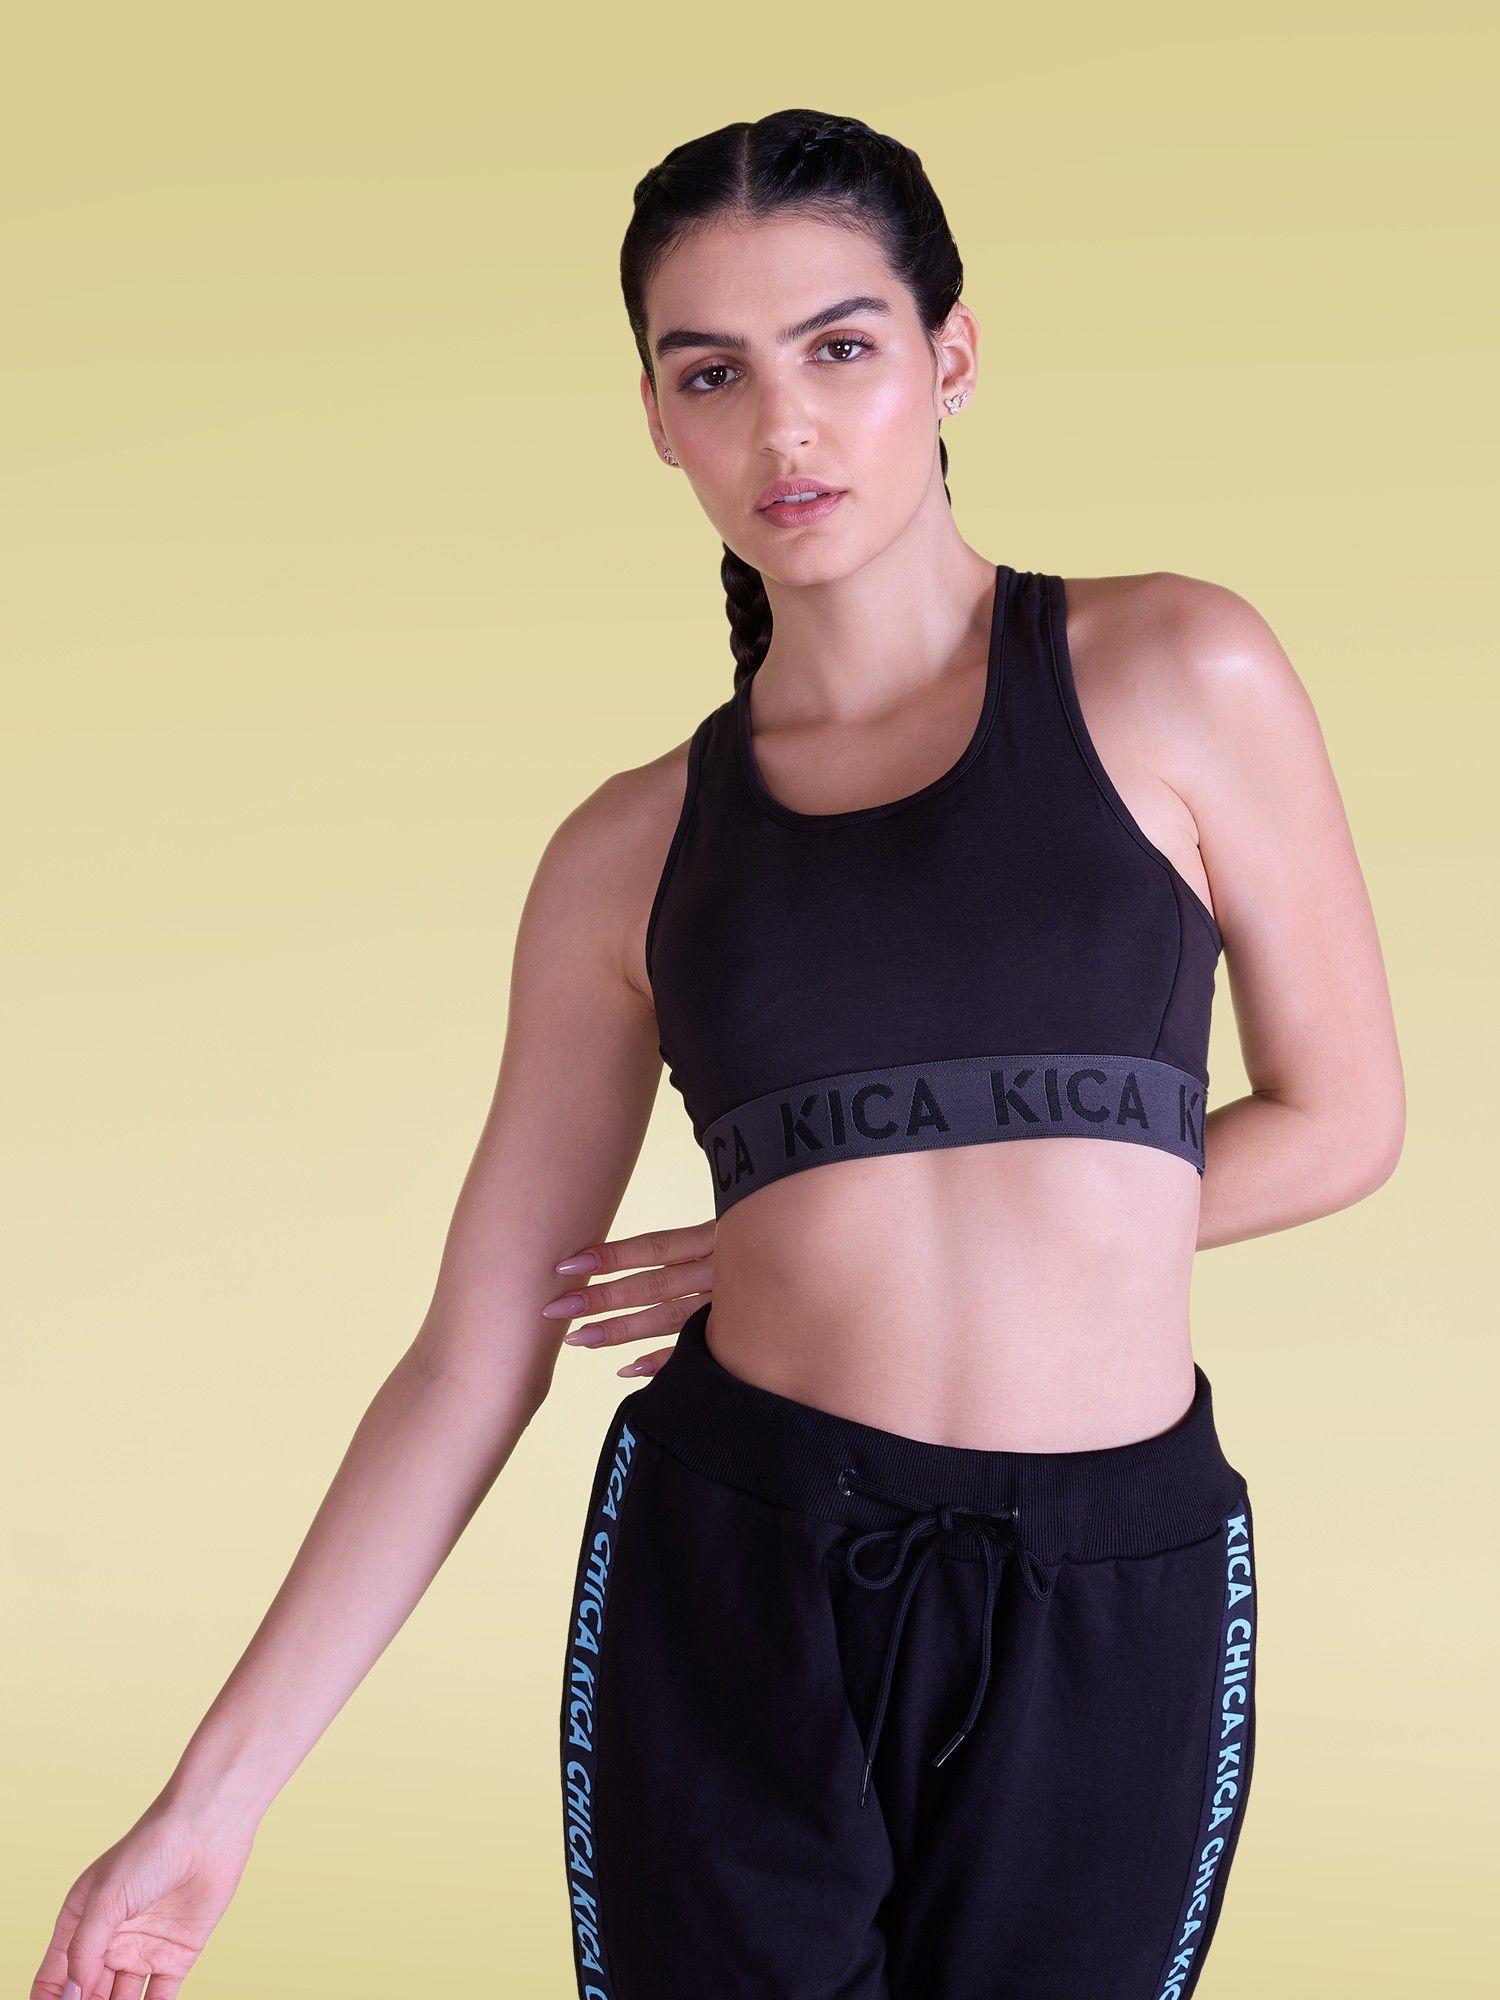 low to mid impact cotton sports bra for low to mid activities